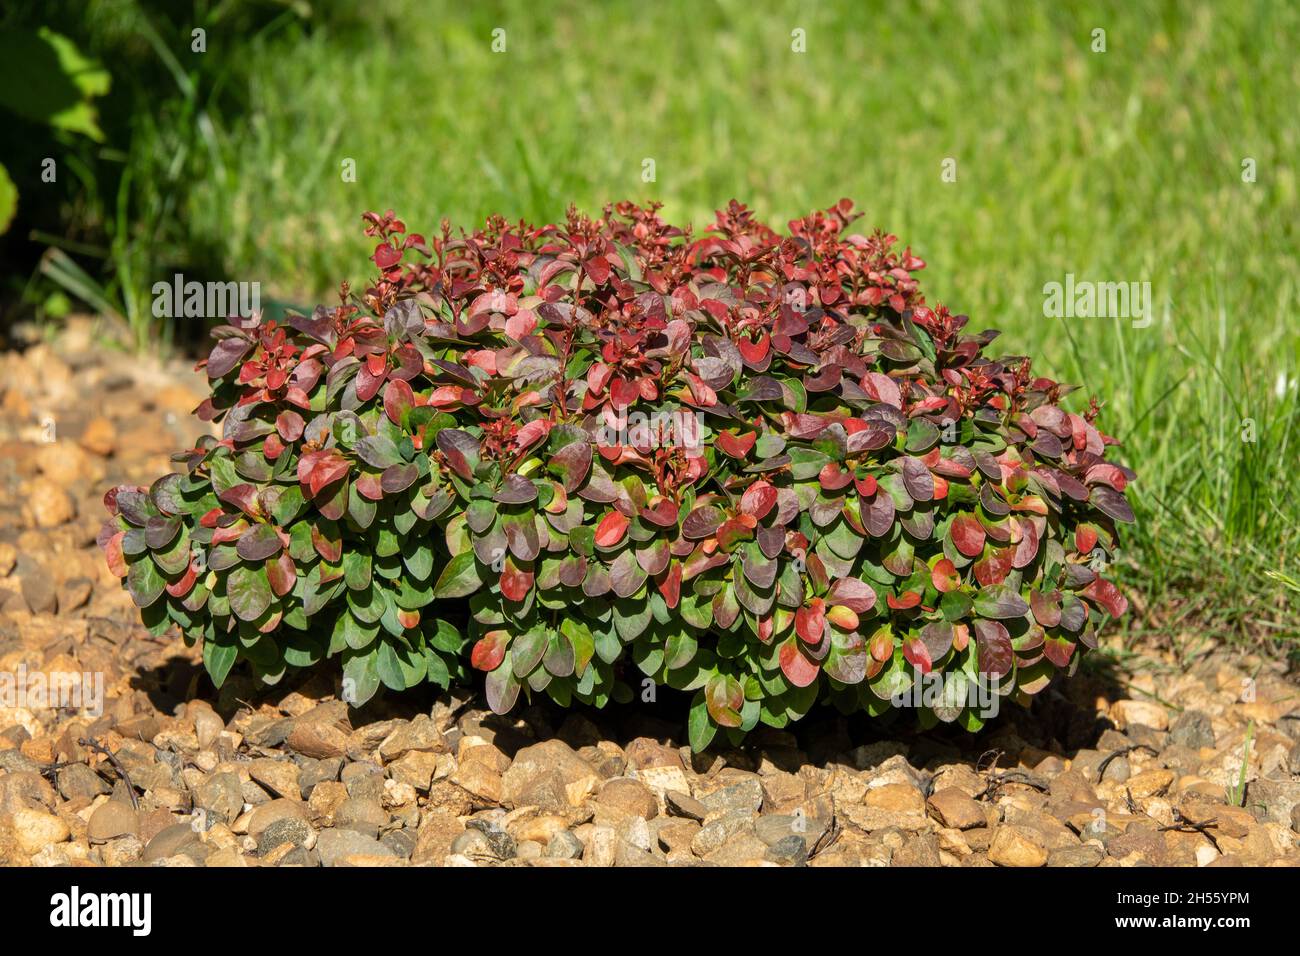 Cultivar Thunbergs barberry Berberis thunbergii Red Rocket in rocky garden. Bright ornamental bush with vivid red-burgundy leaves, focus is at foregro Stock Photo